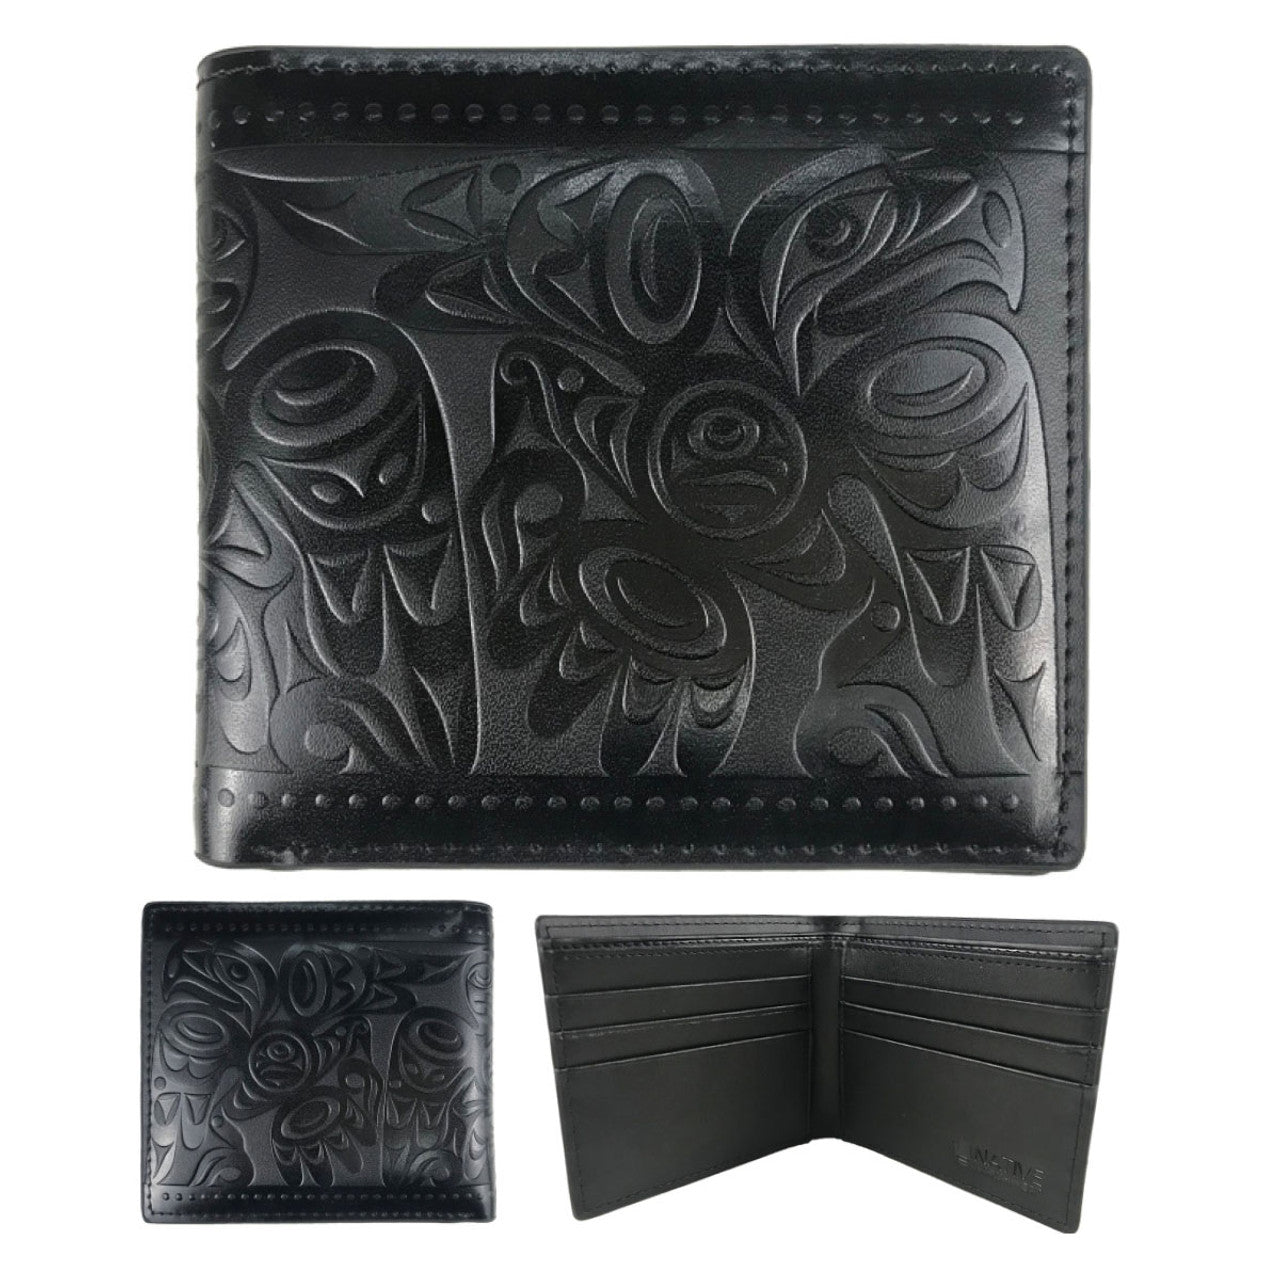 Leather Embossed Wallet - Eagle